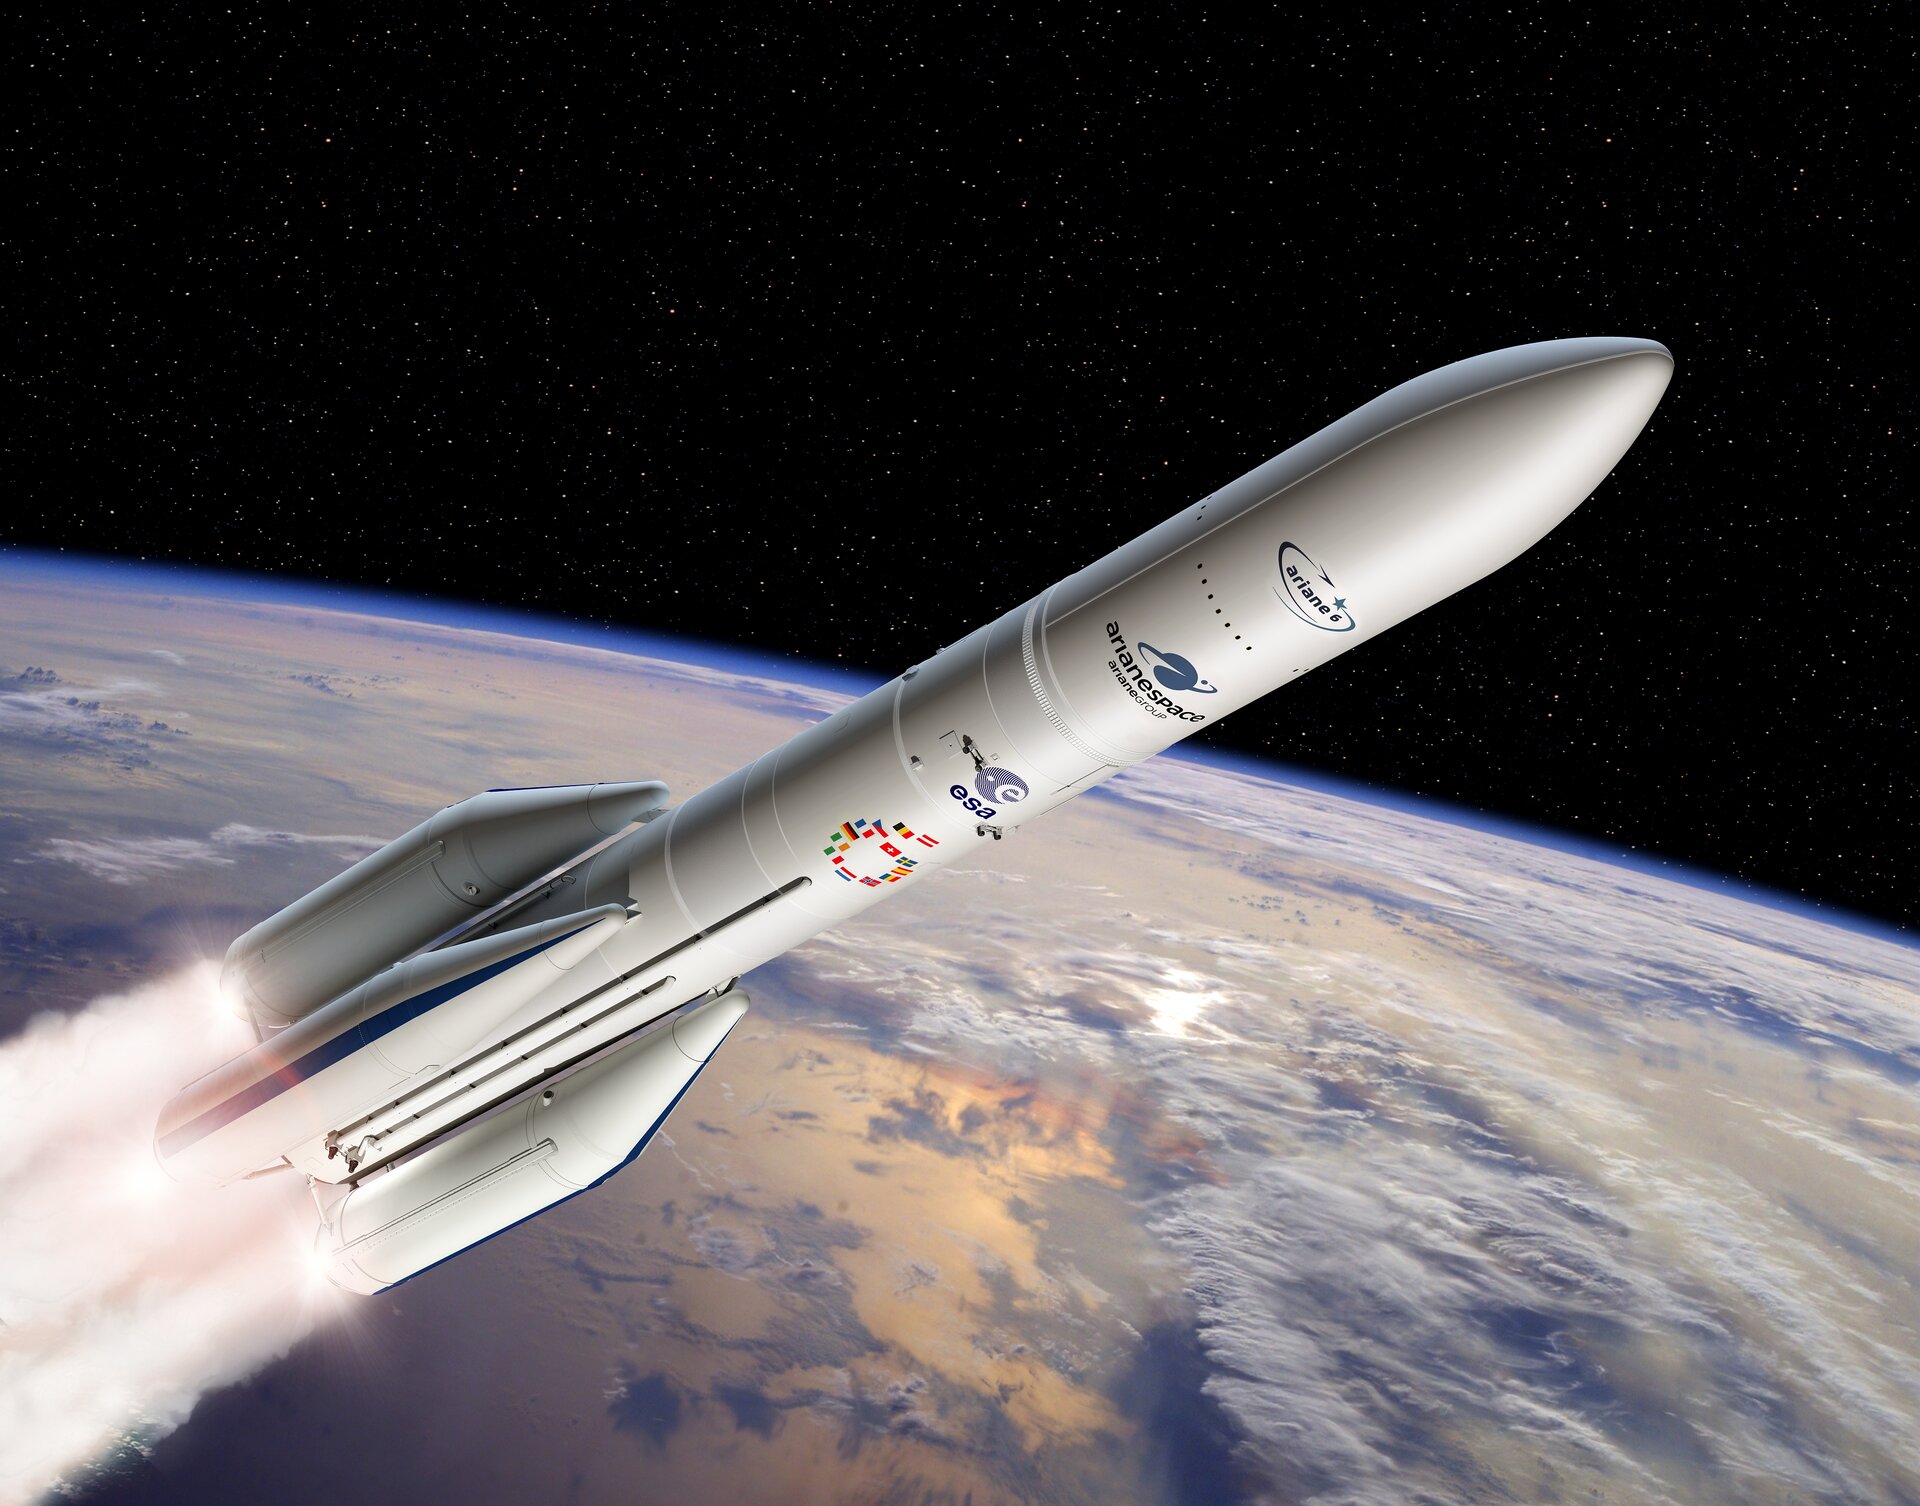 Ariane 6 will Launch the First Portuguese Cubesat